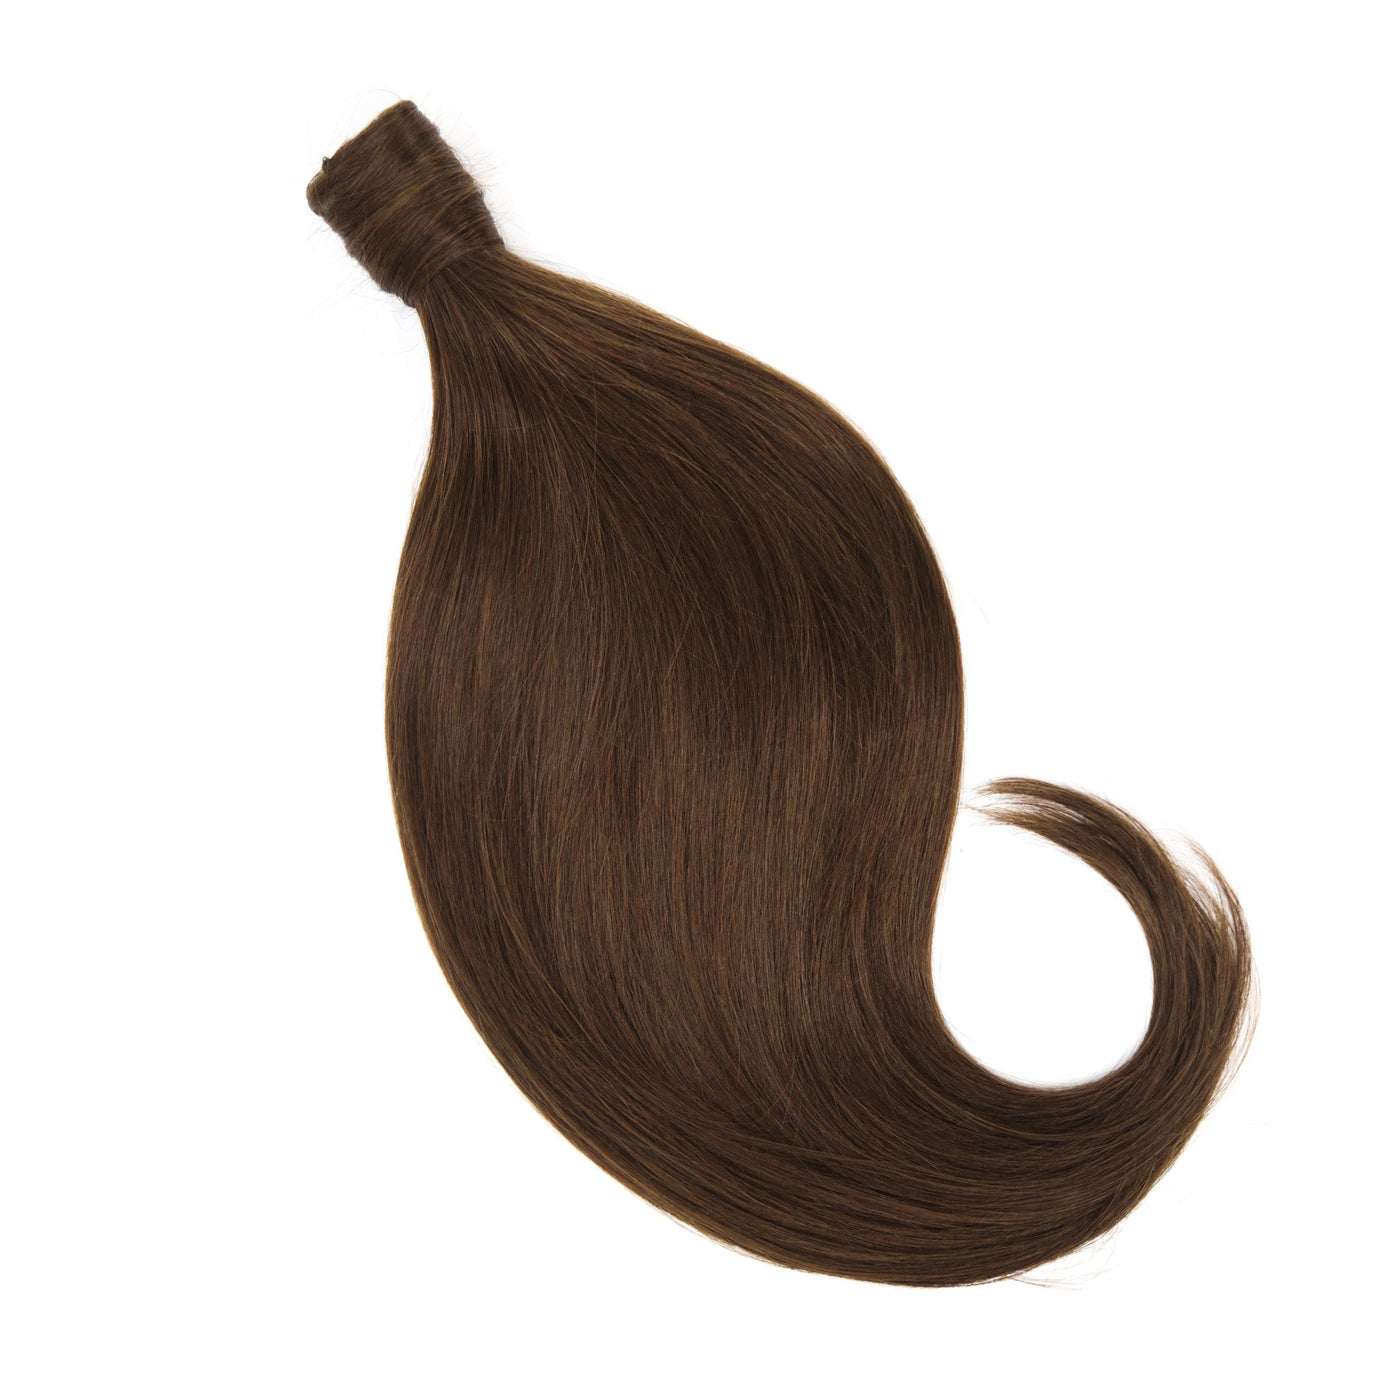 #2 AquaLyna Ponytail Hair Extension